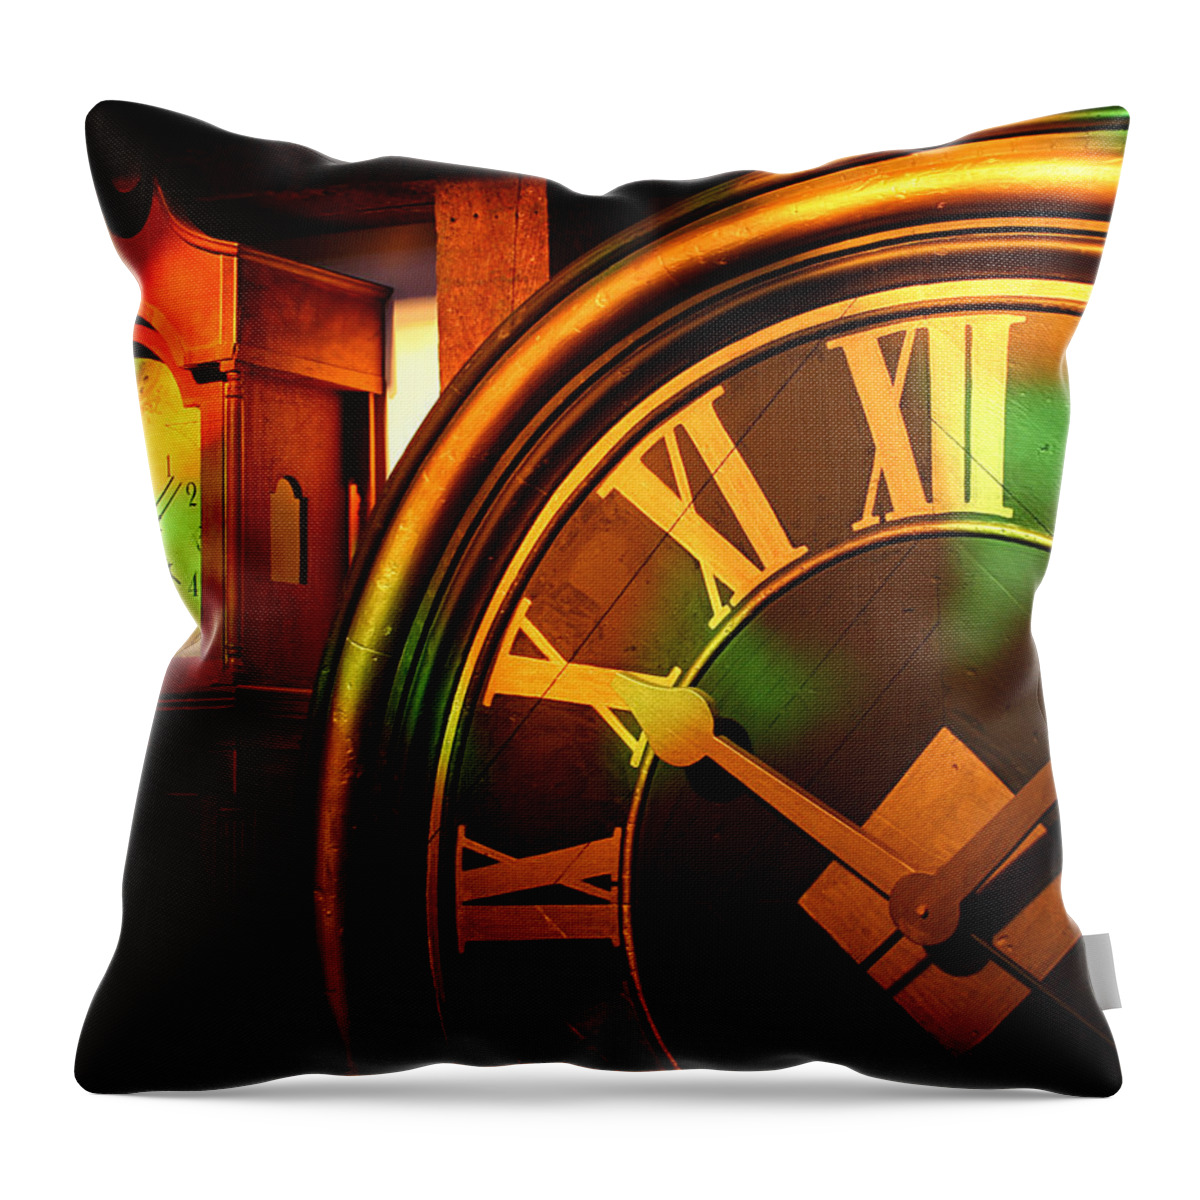 Still Life Throw Pillow featuring the photograph Clocks by William Selander